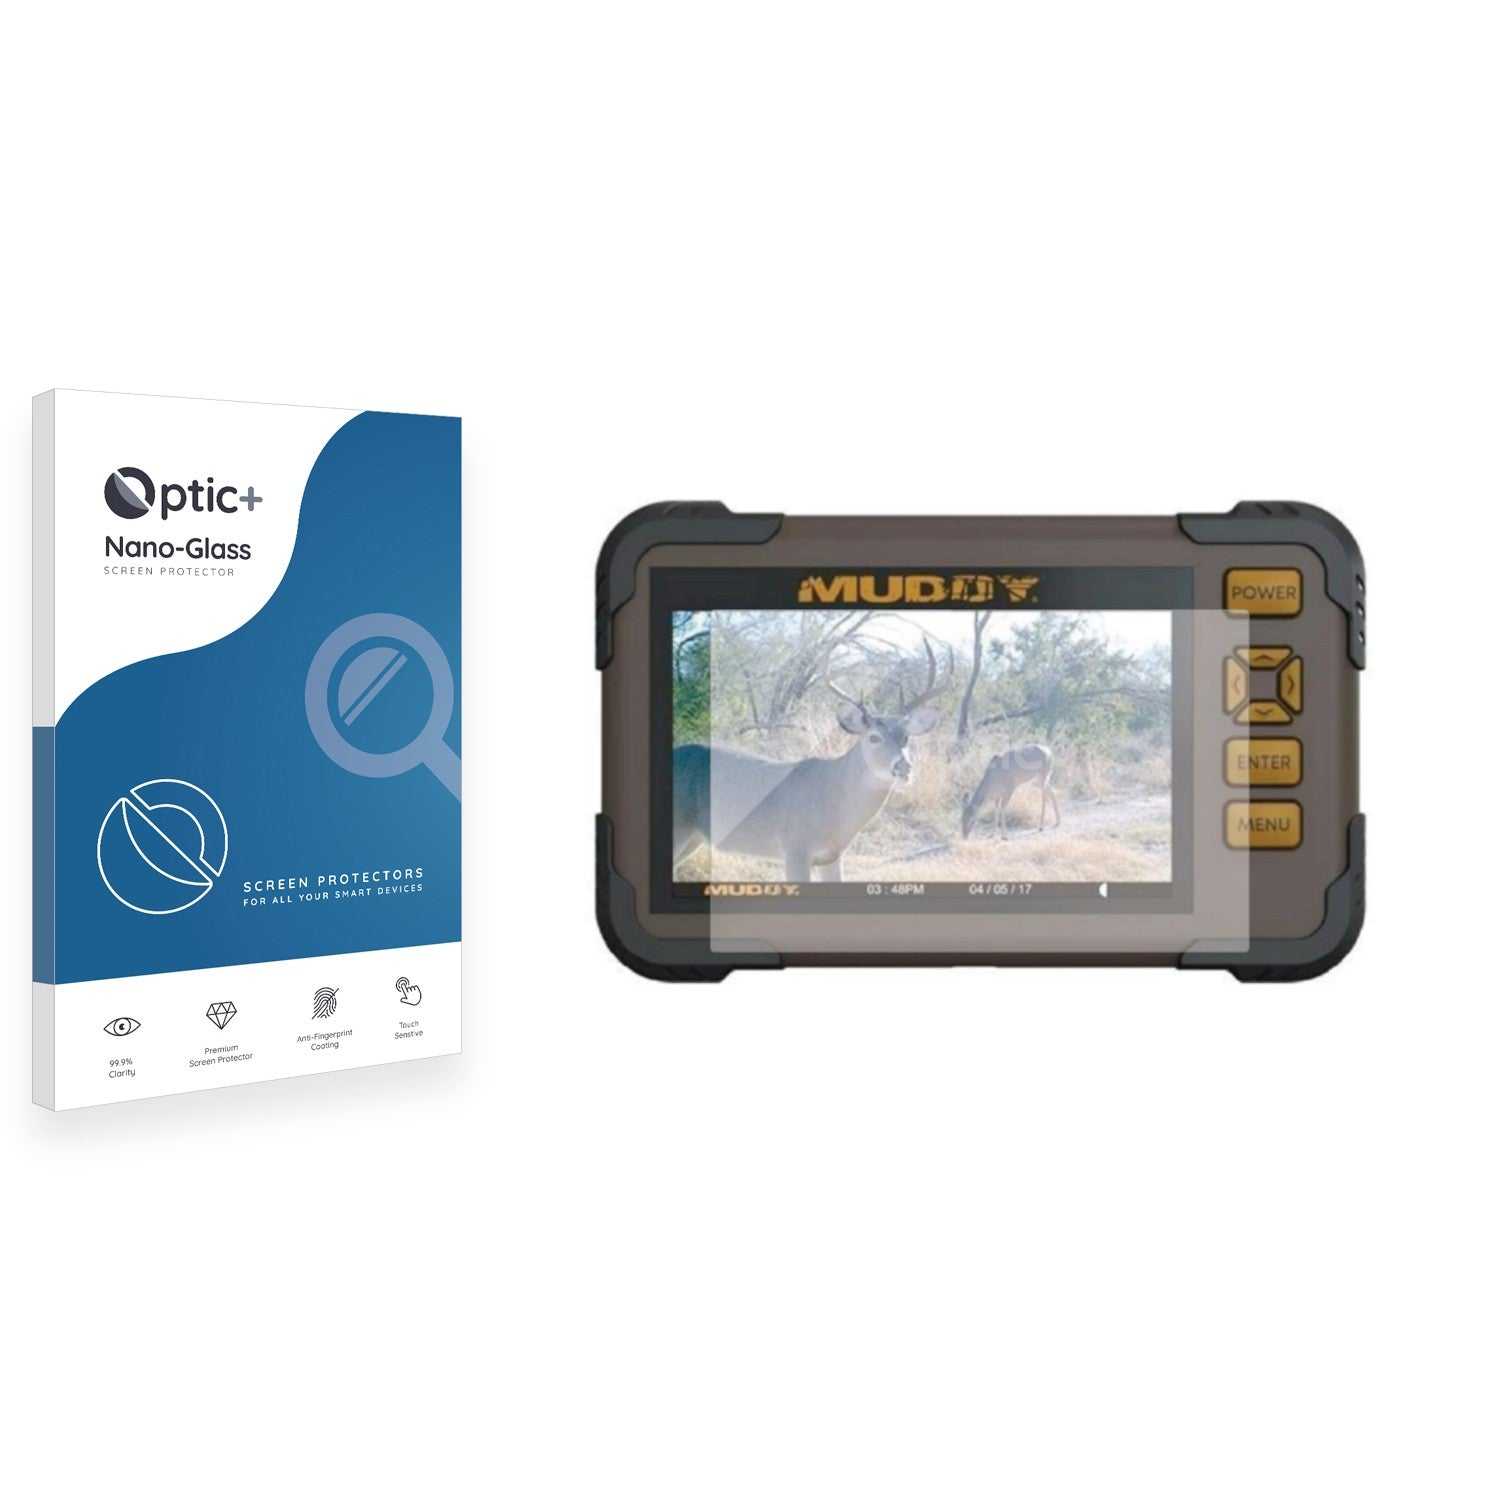 ScreenShield, Optic+ Nano Glass Screen Protector for Muddy Outdoors 4.3" SD Card Viewer